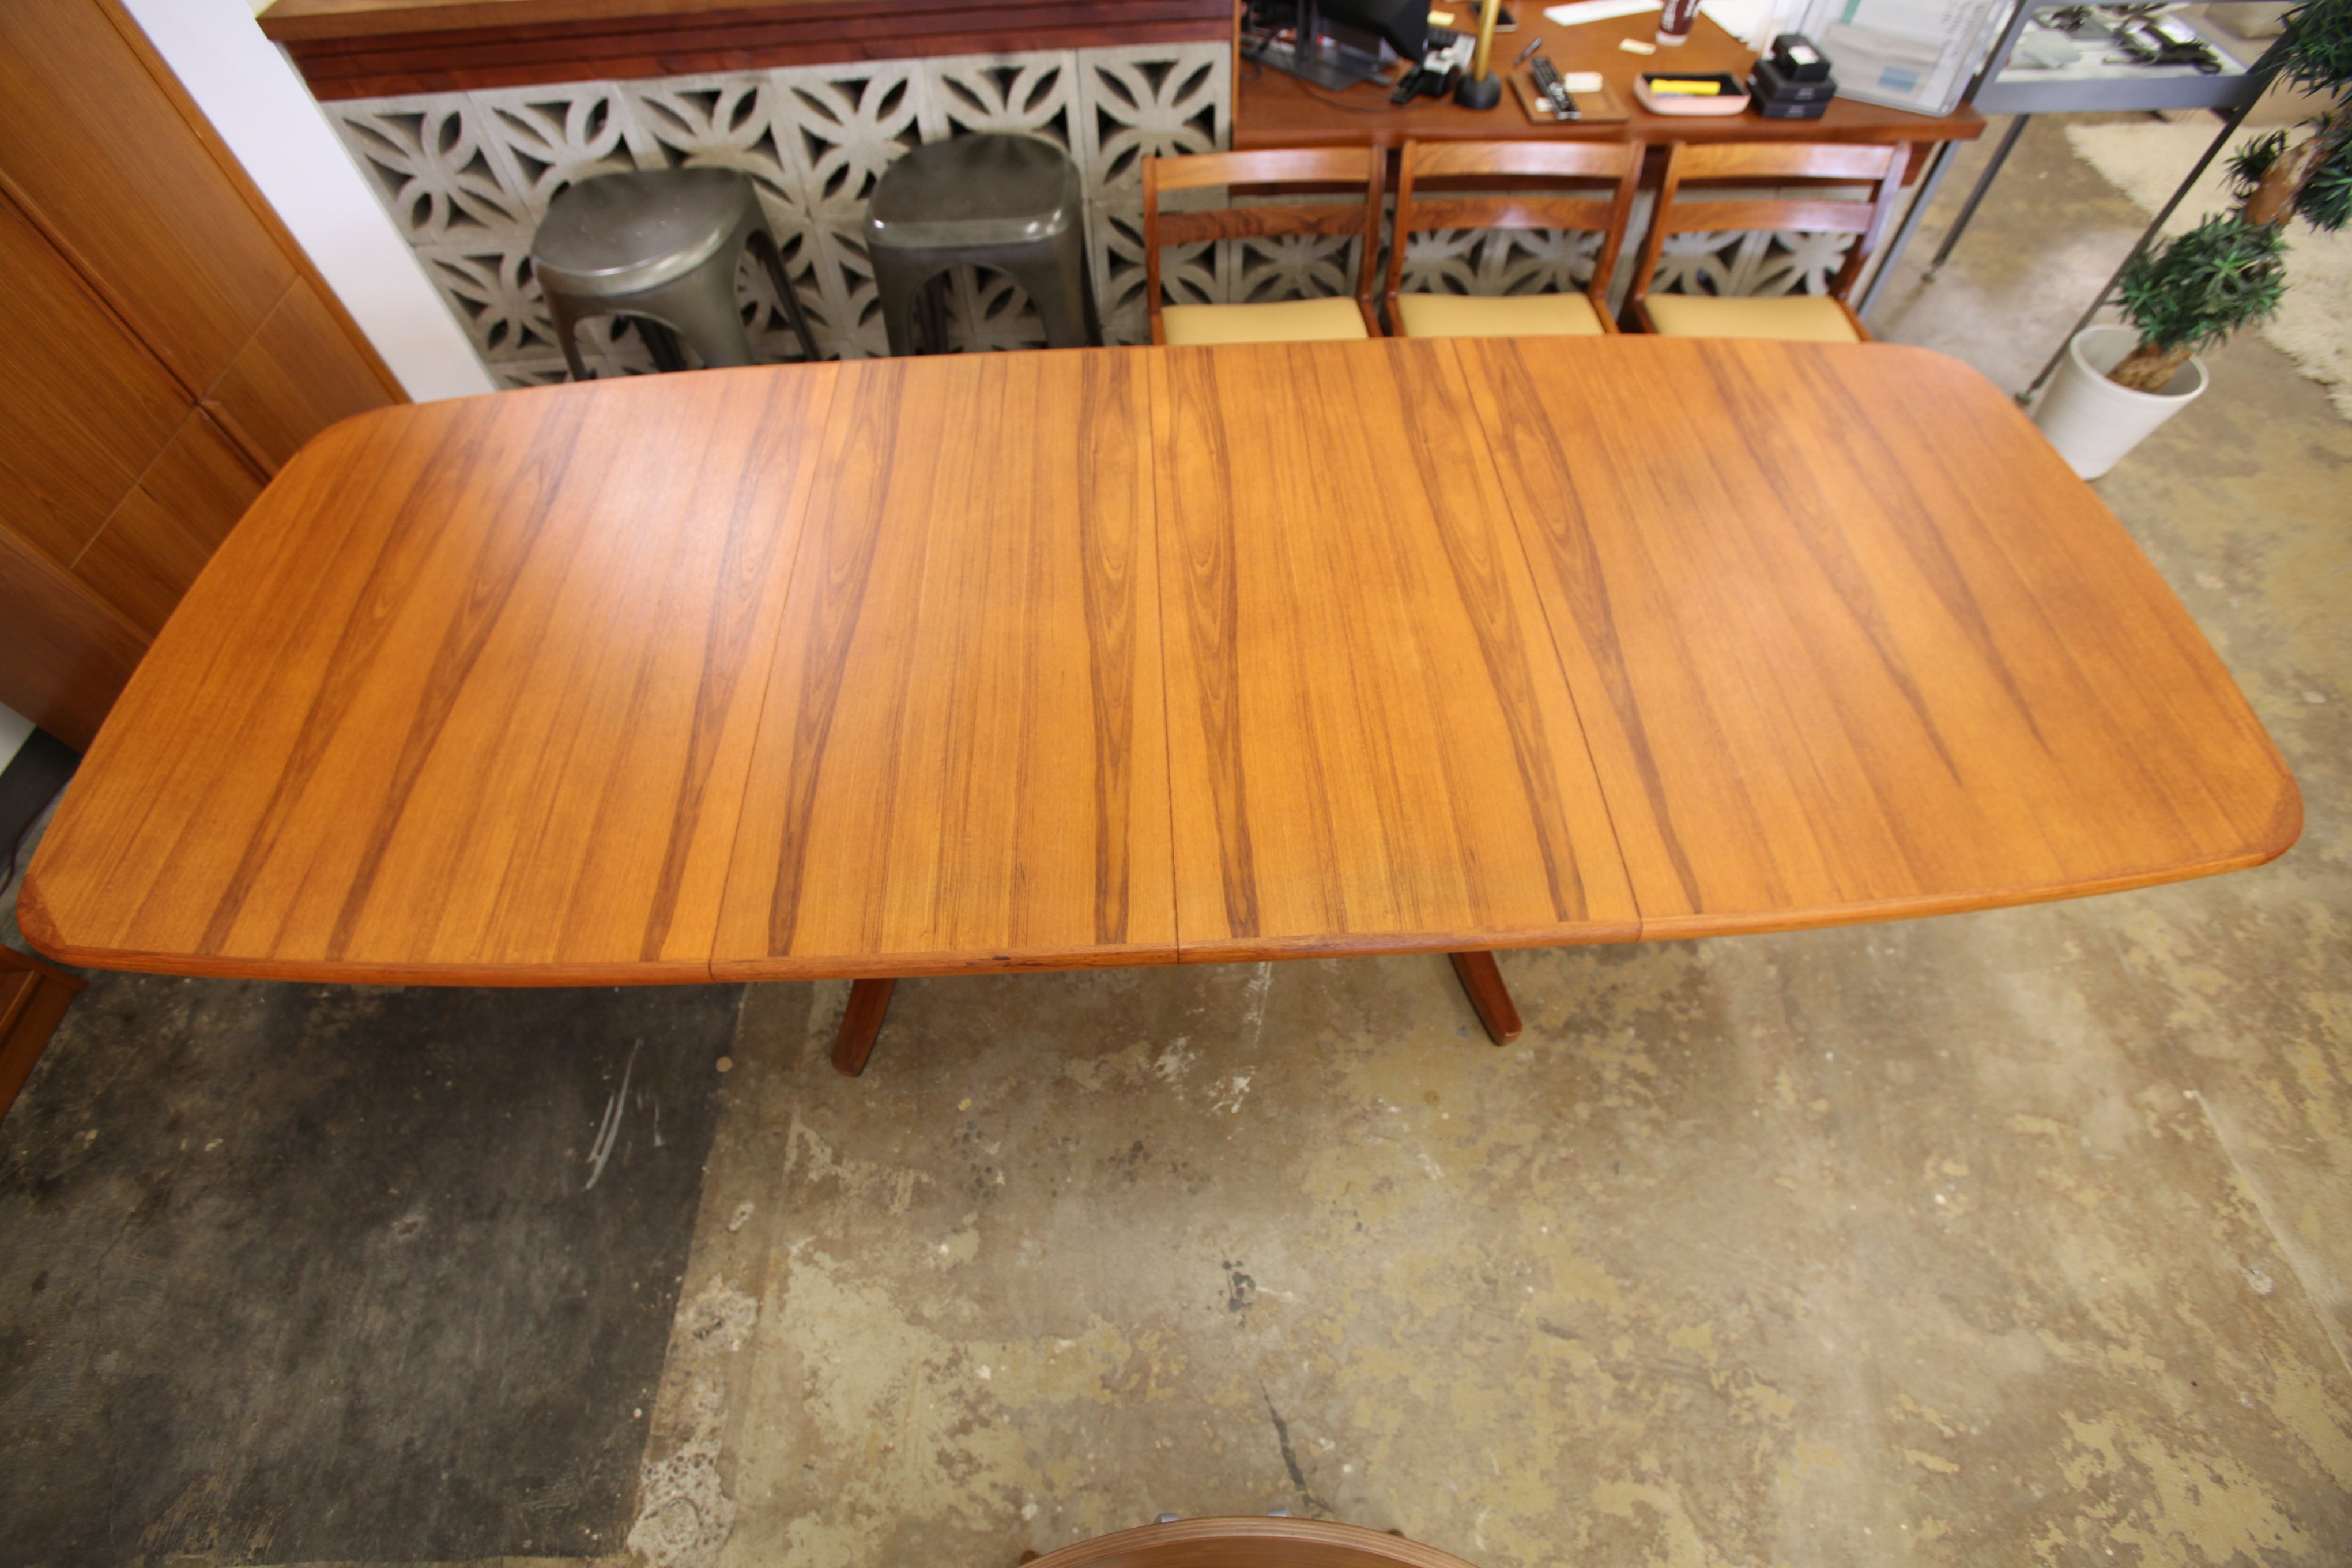 Large Vintage Teak Dining Table w/ 2 Leafs (108" x 42") or (69.5" x 42")